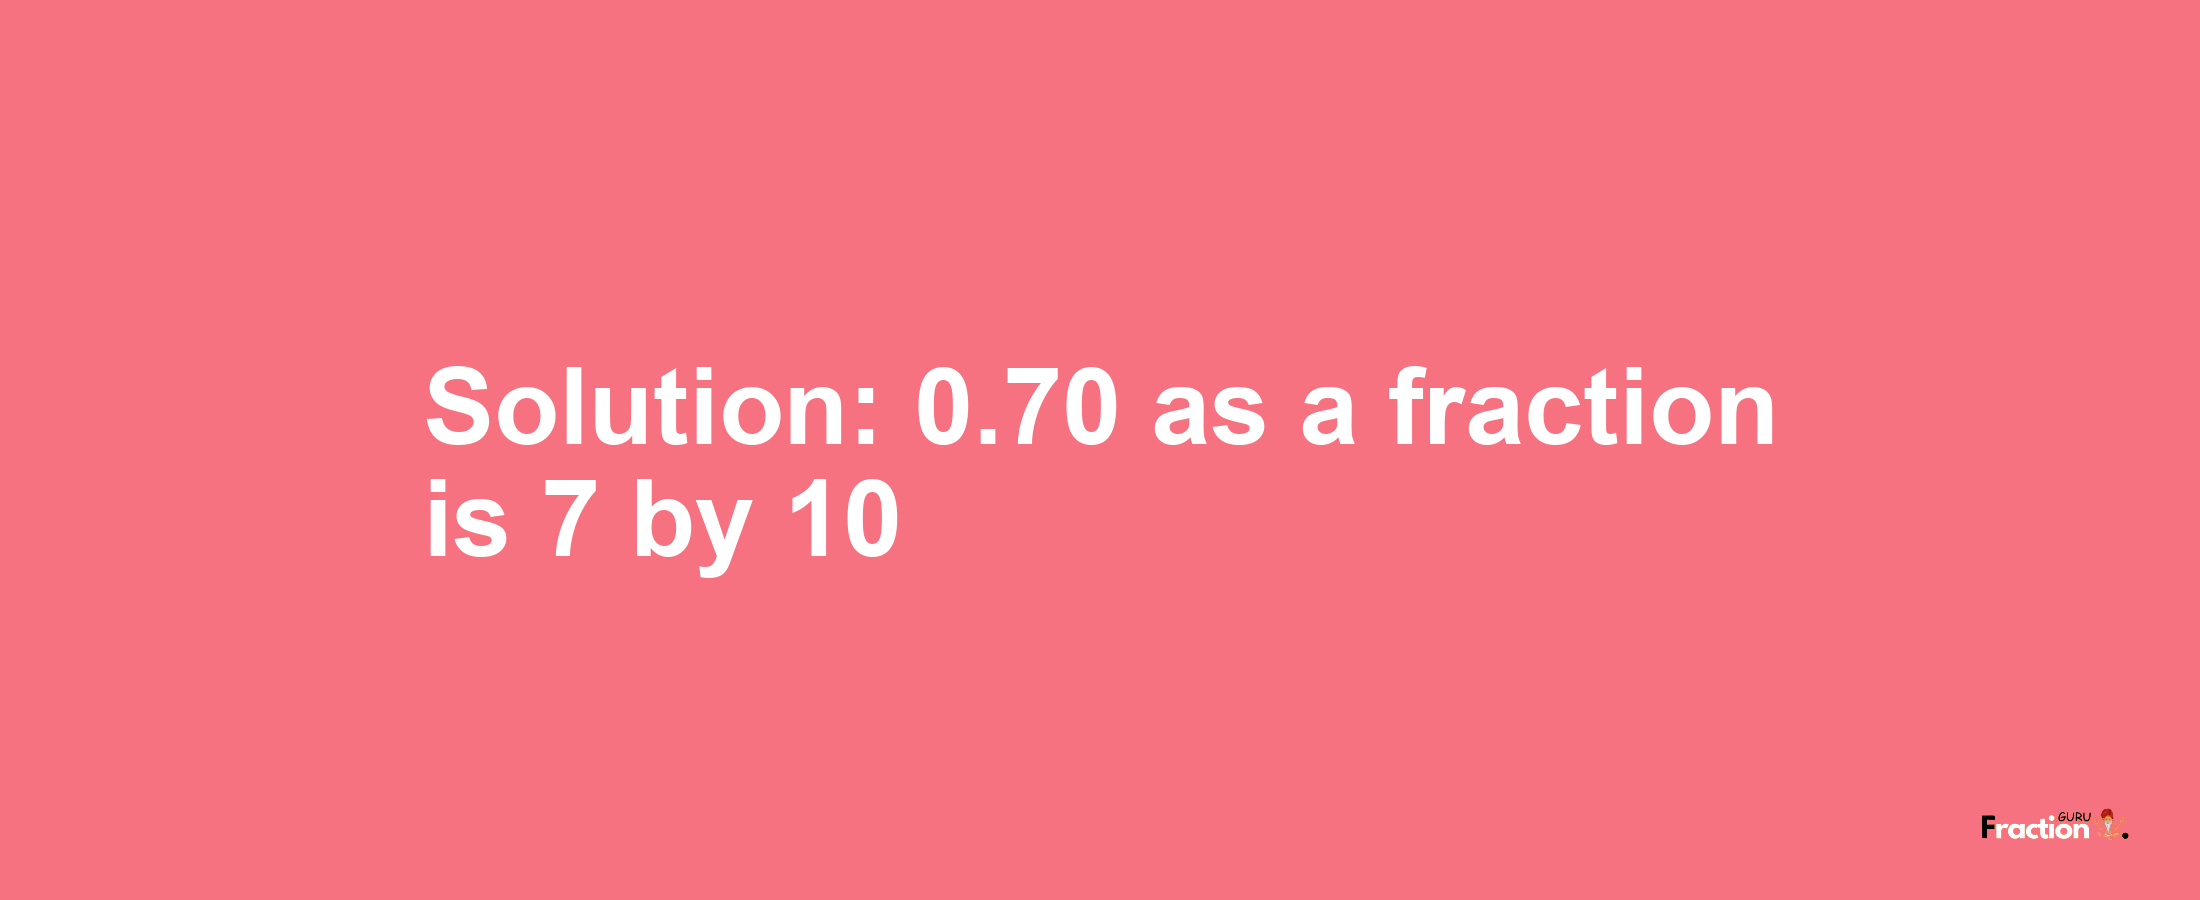 Solution:0.70 as a fraction is 7/10